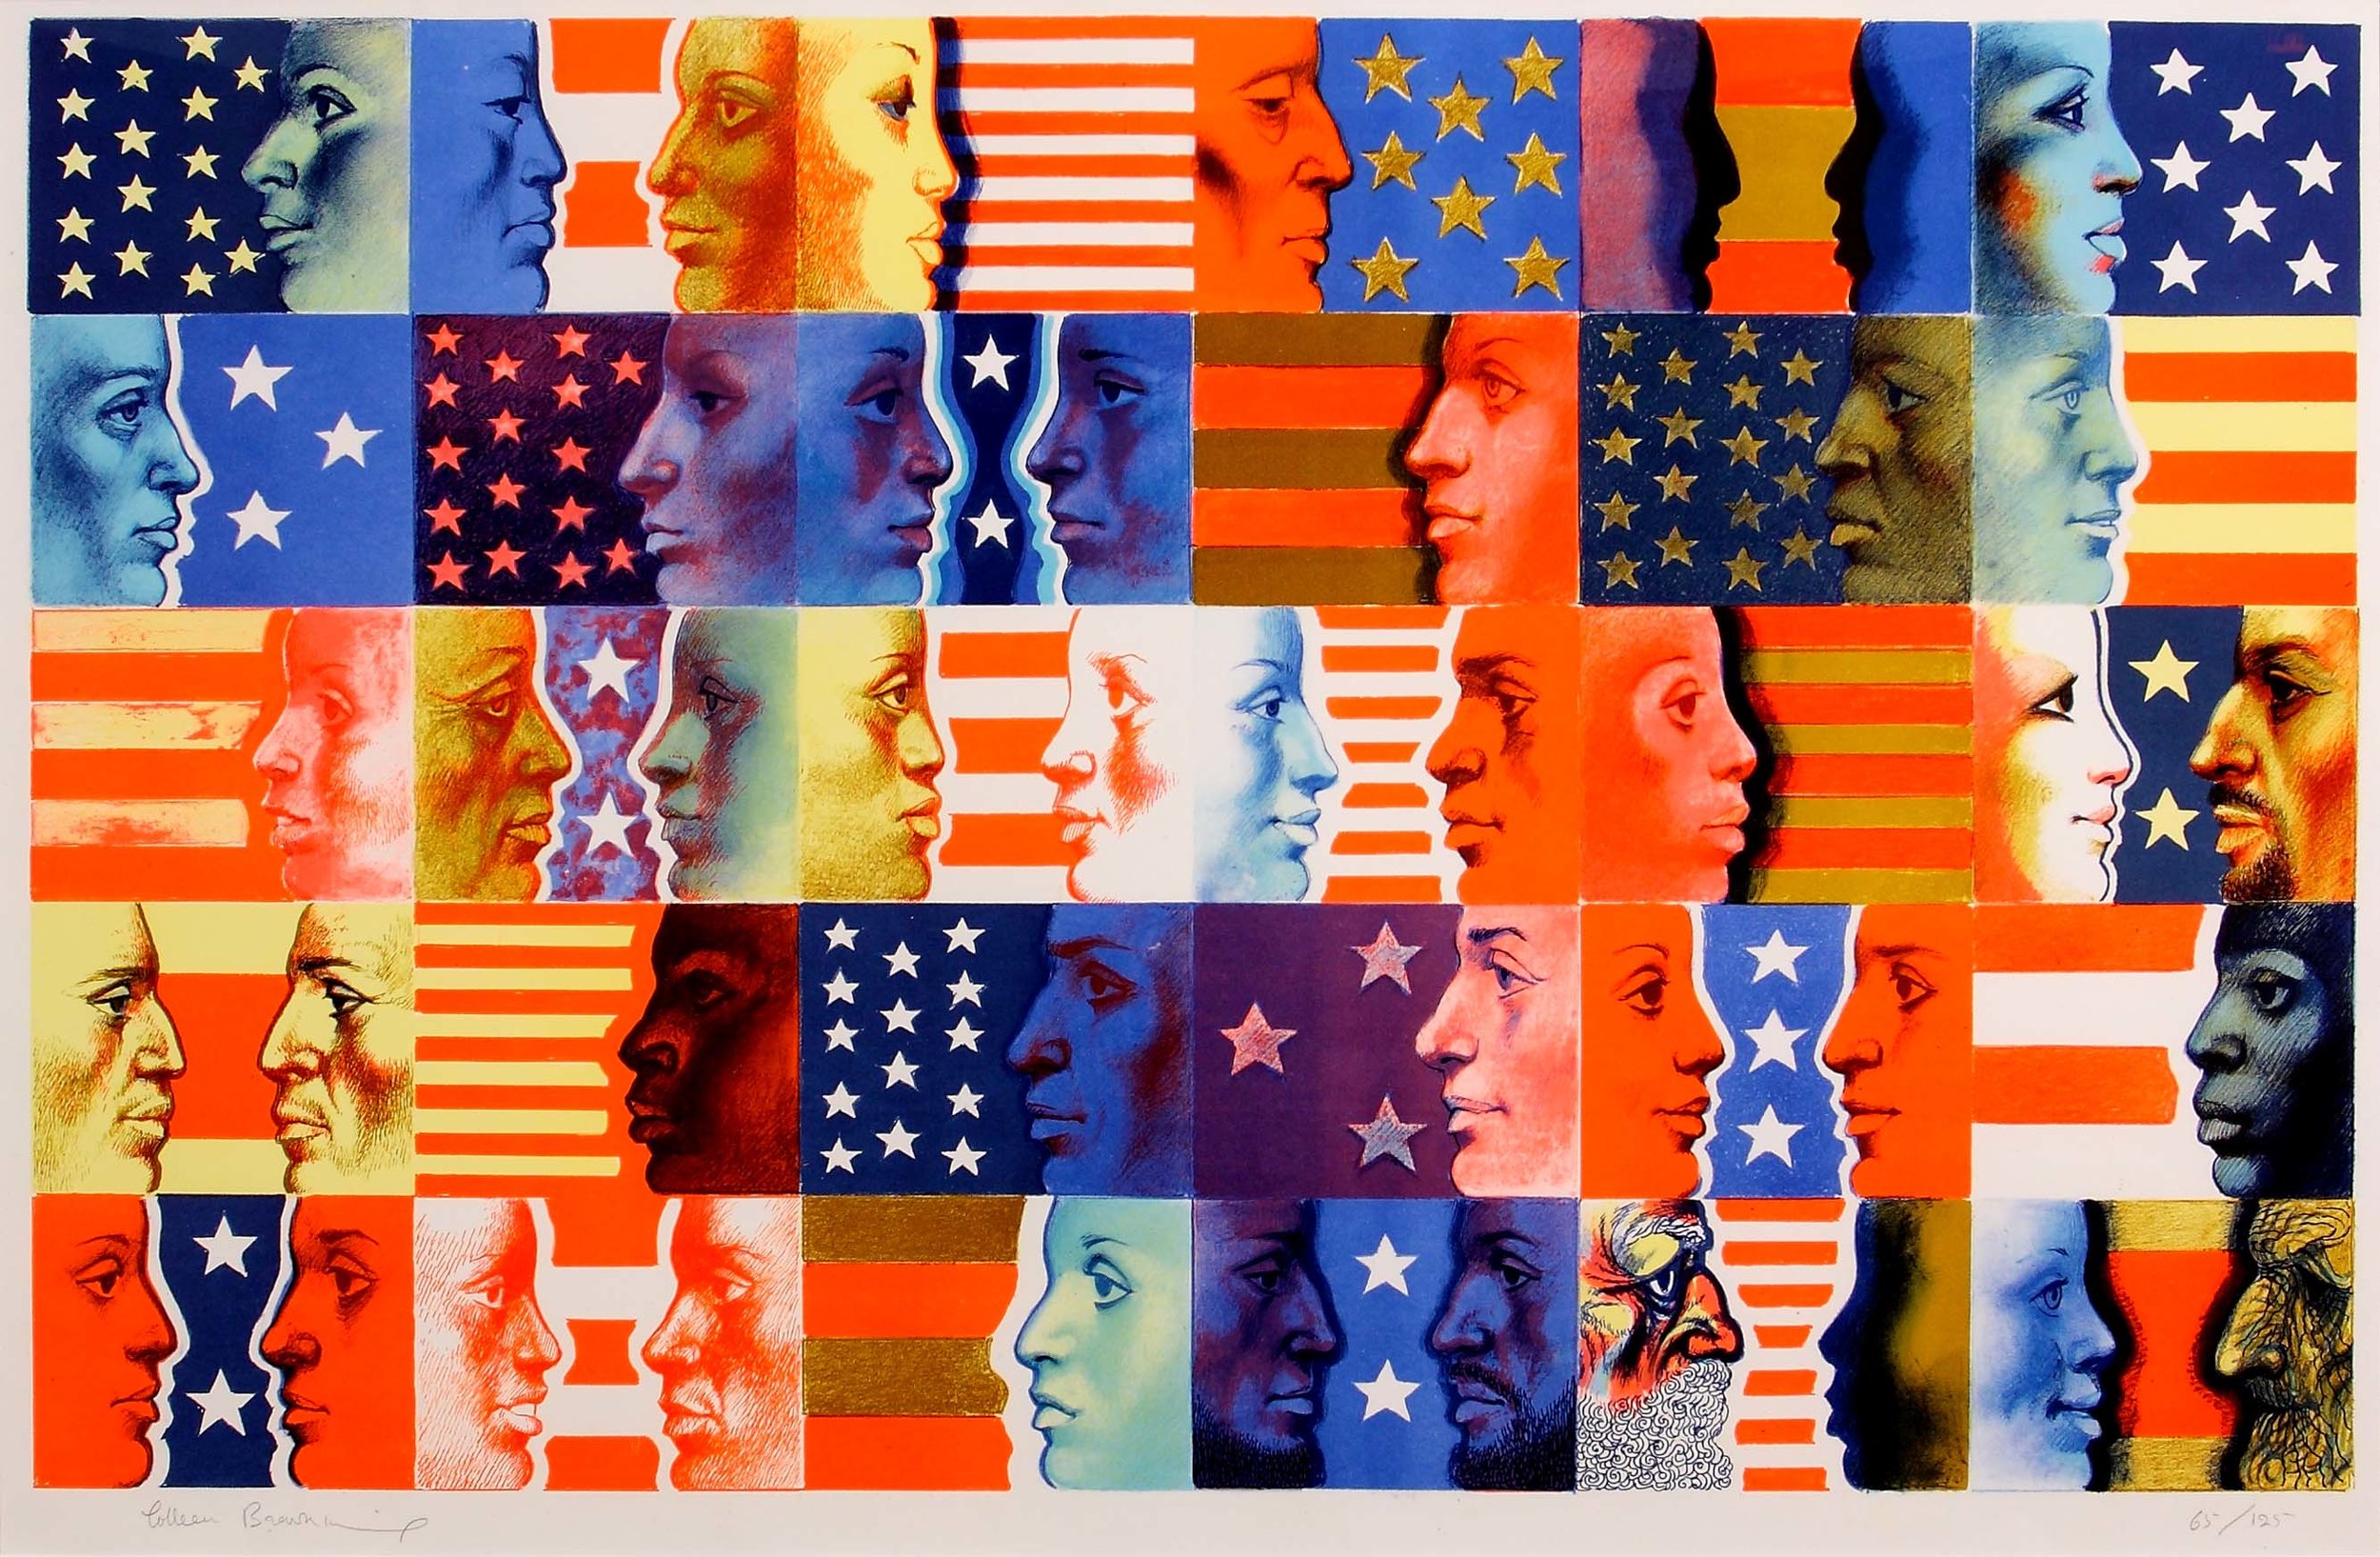 The sides of different faces in squares against stars and stripes.